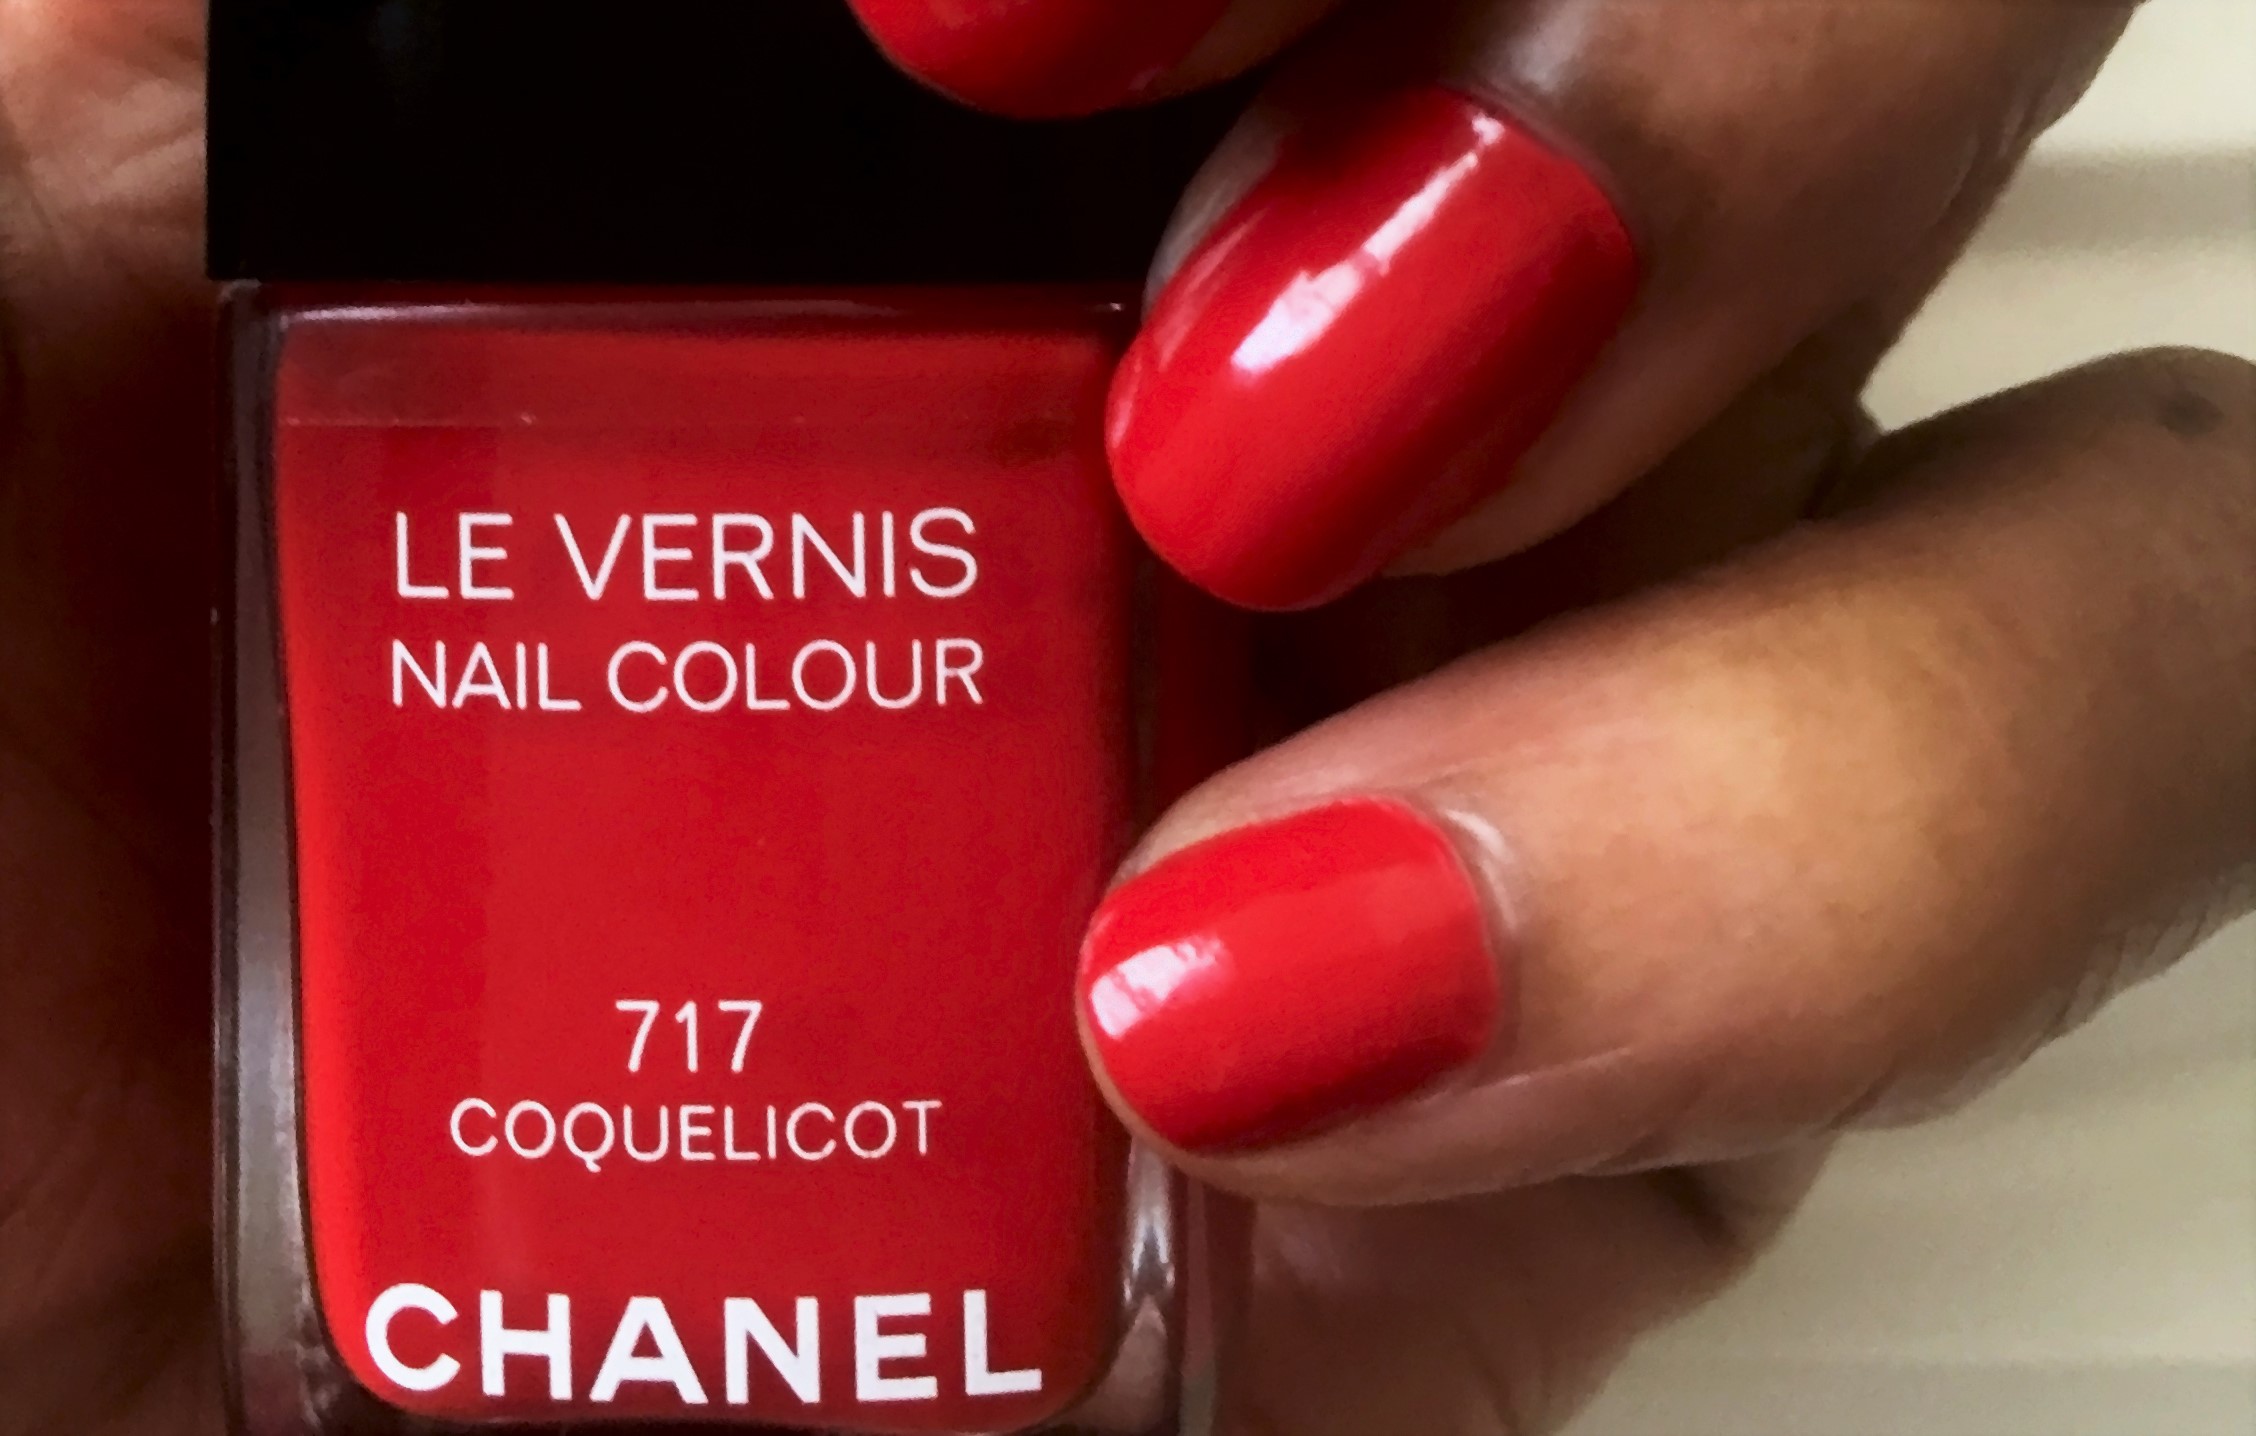 Le Vernis Chanel polish is it worth the $27? - AvenueSixty